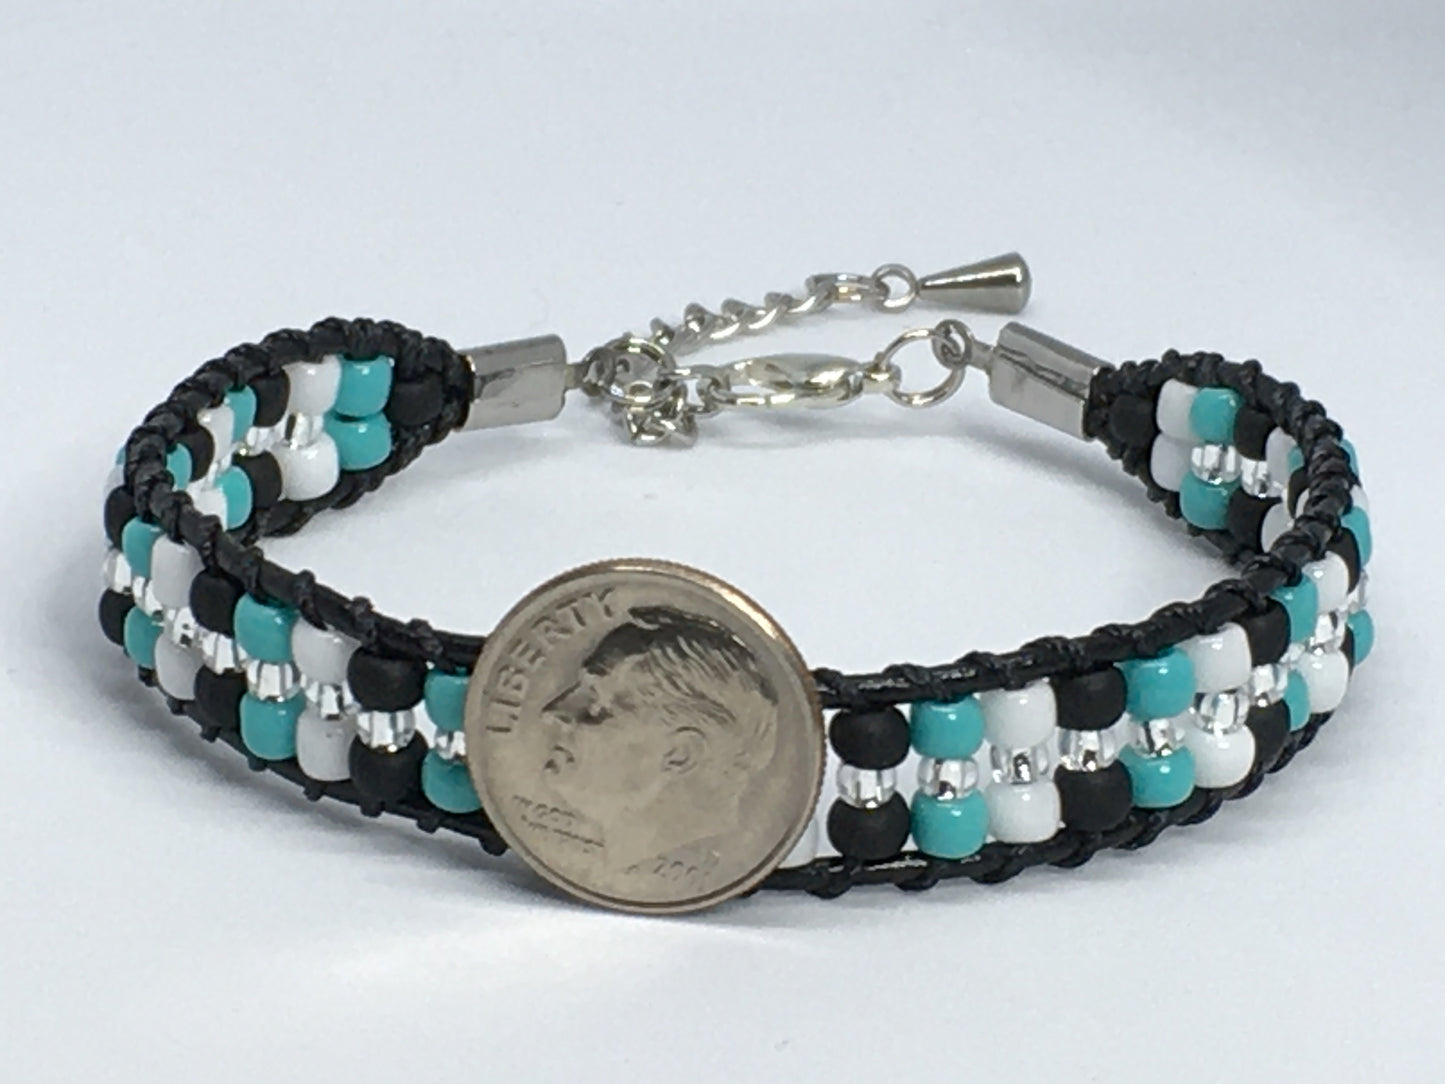 7.5" Bead and Leather Women's Bracelet